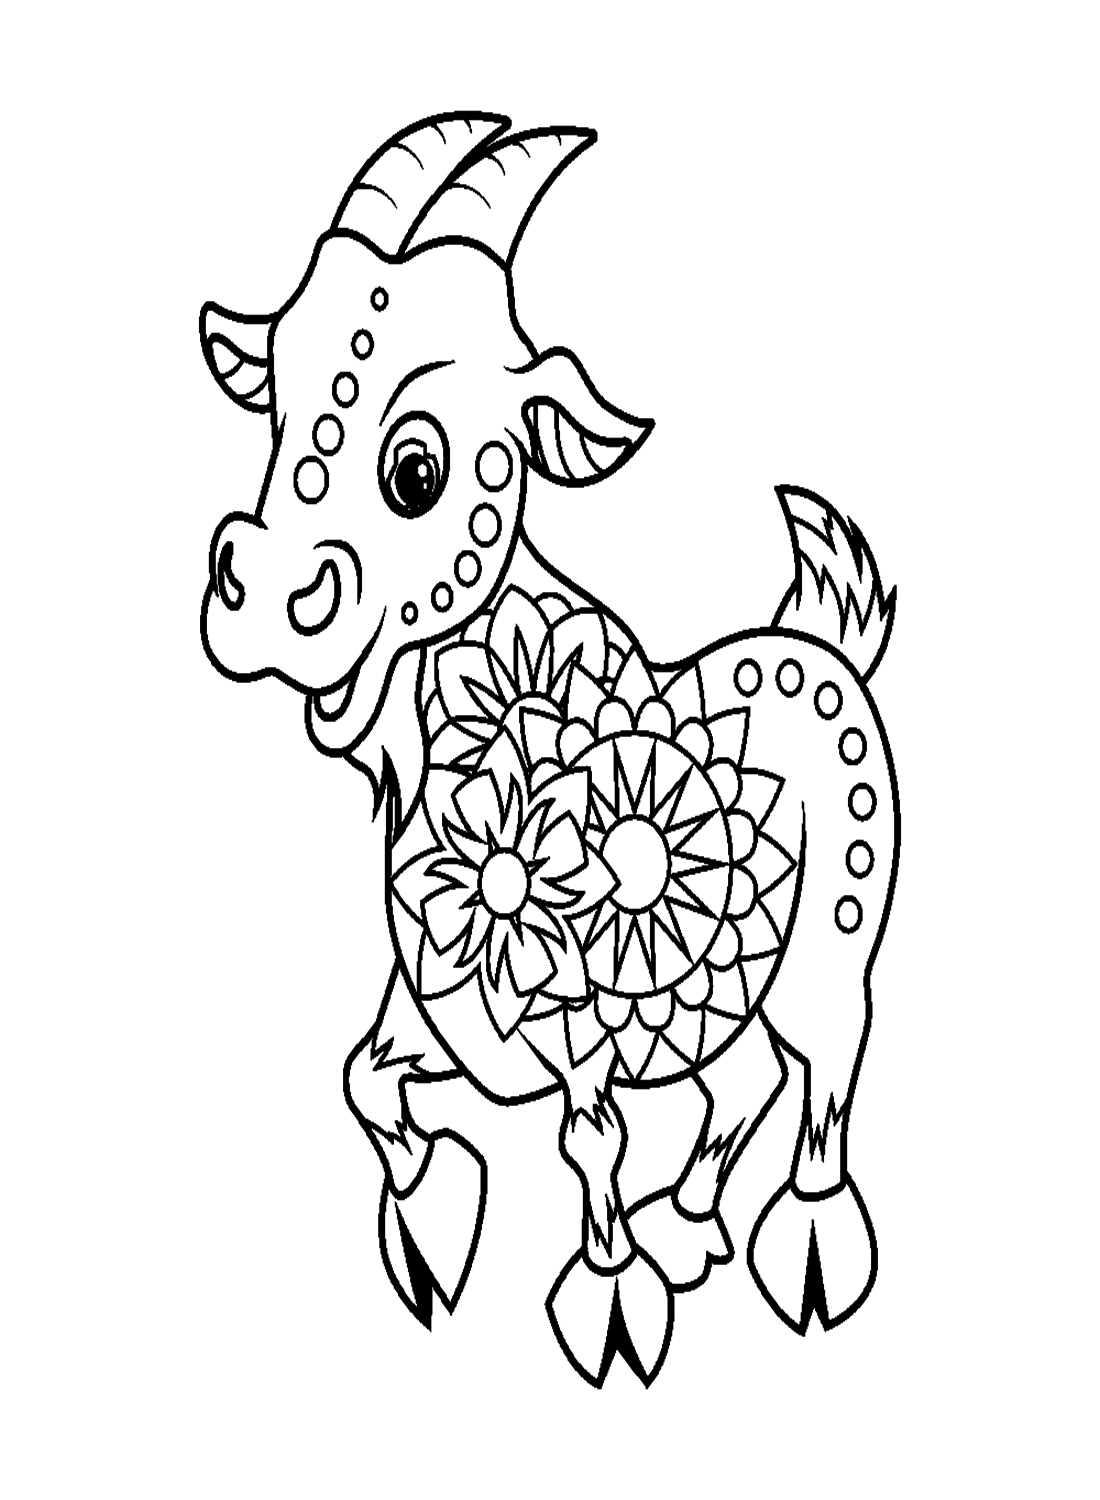 Cute Goat In Zentangle Style Coloring Pages